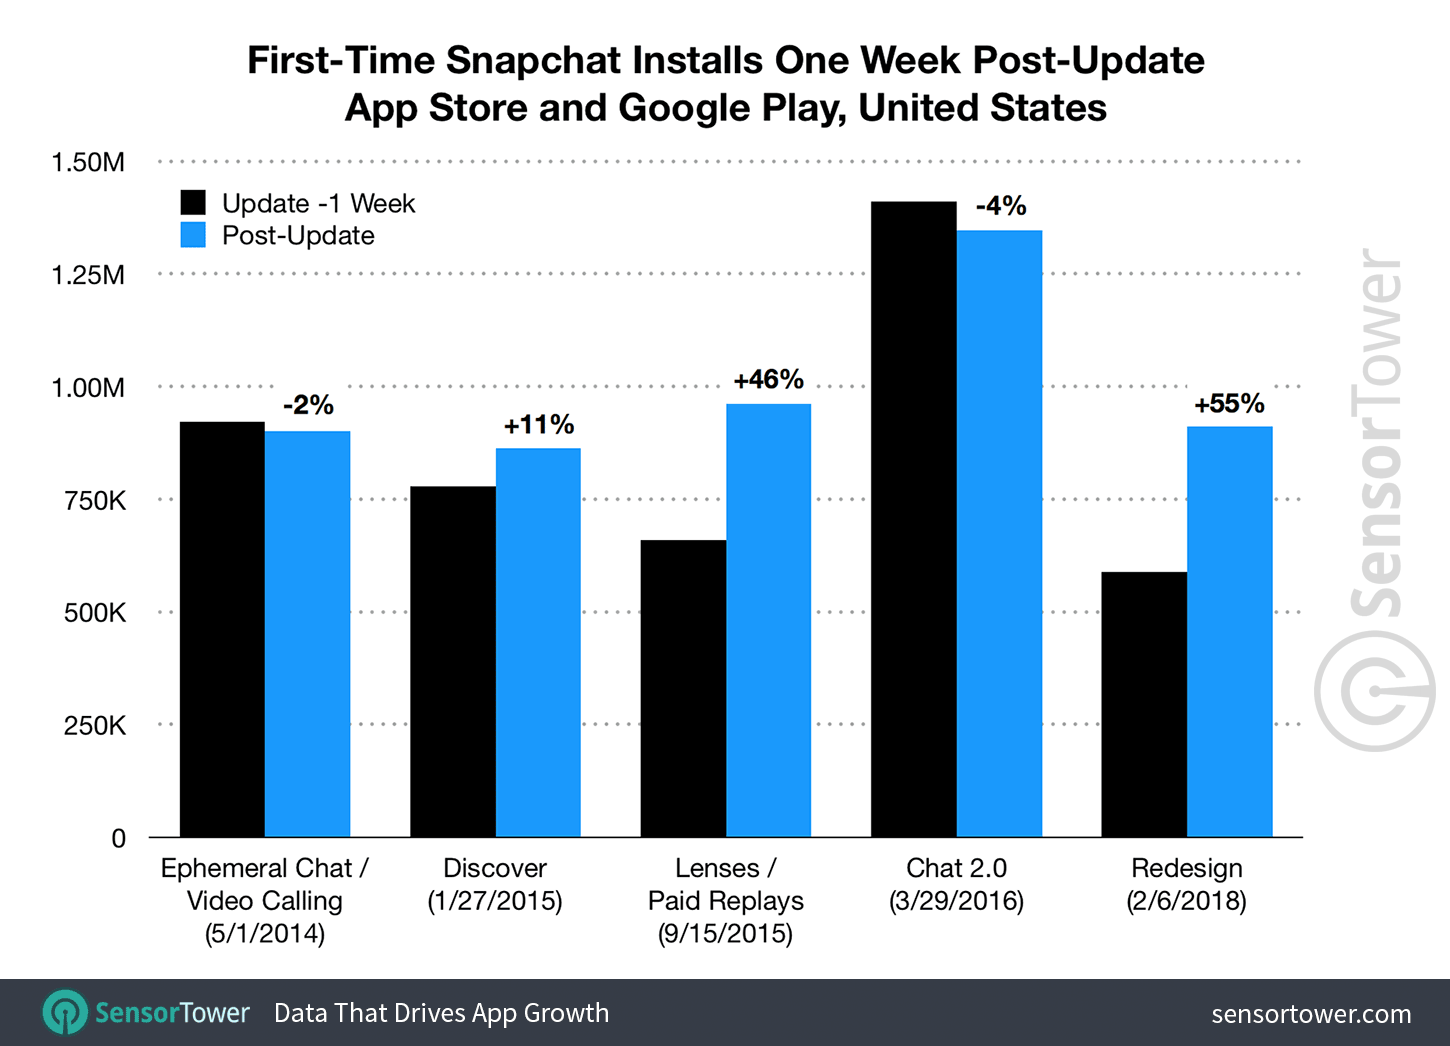 Post-Update Snapchat Downloads in the United States